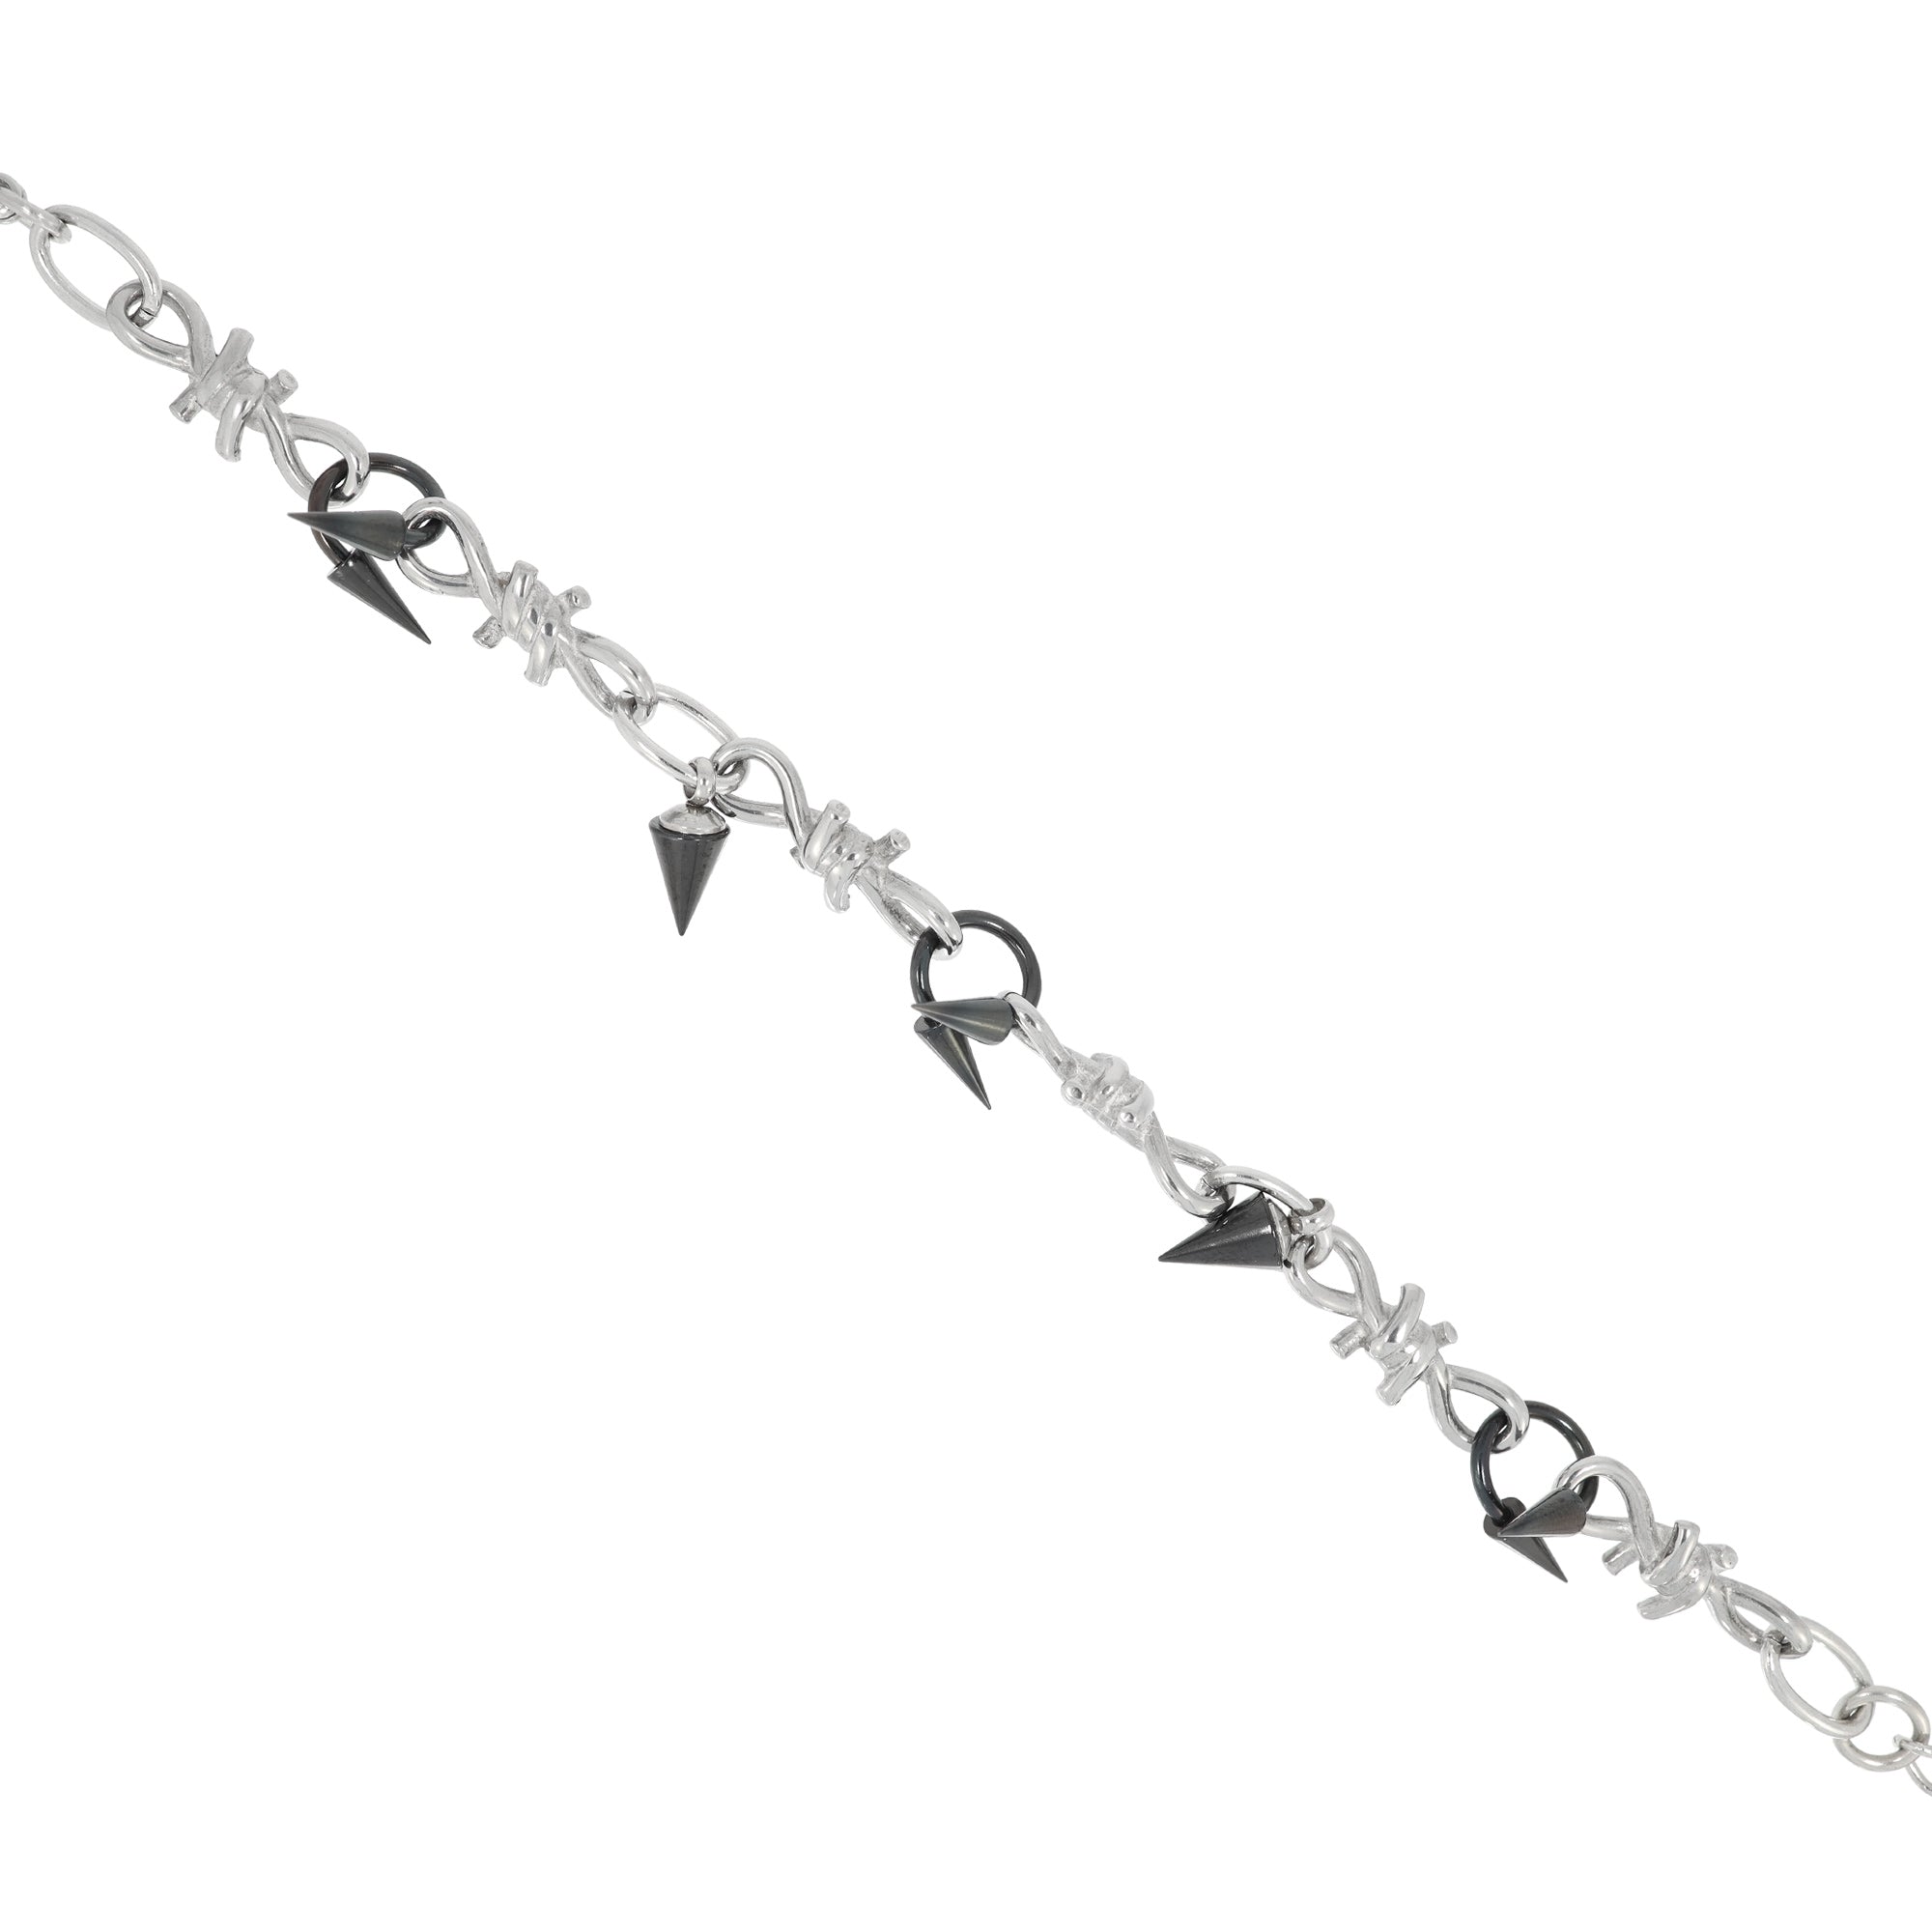 Spin Cone Barbed Wire Bracelet